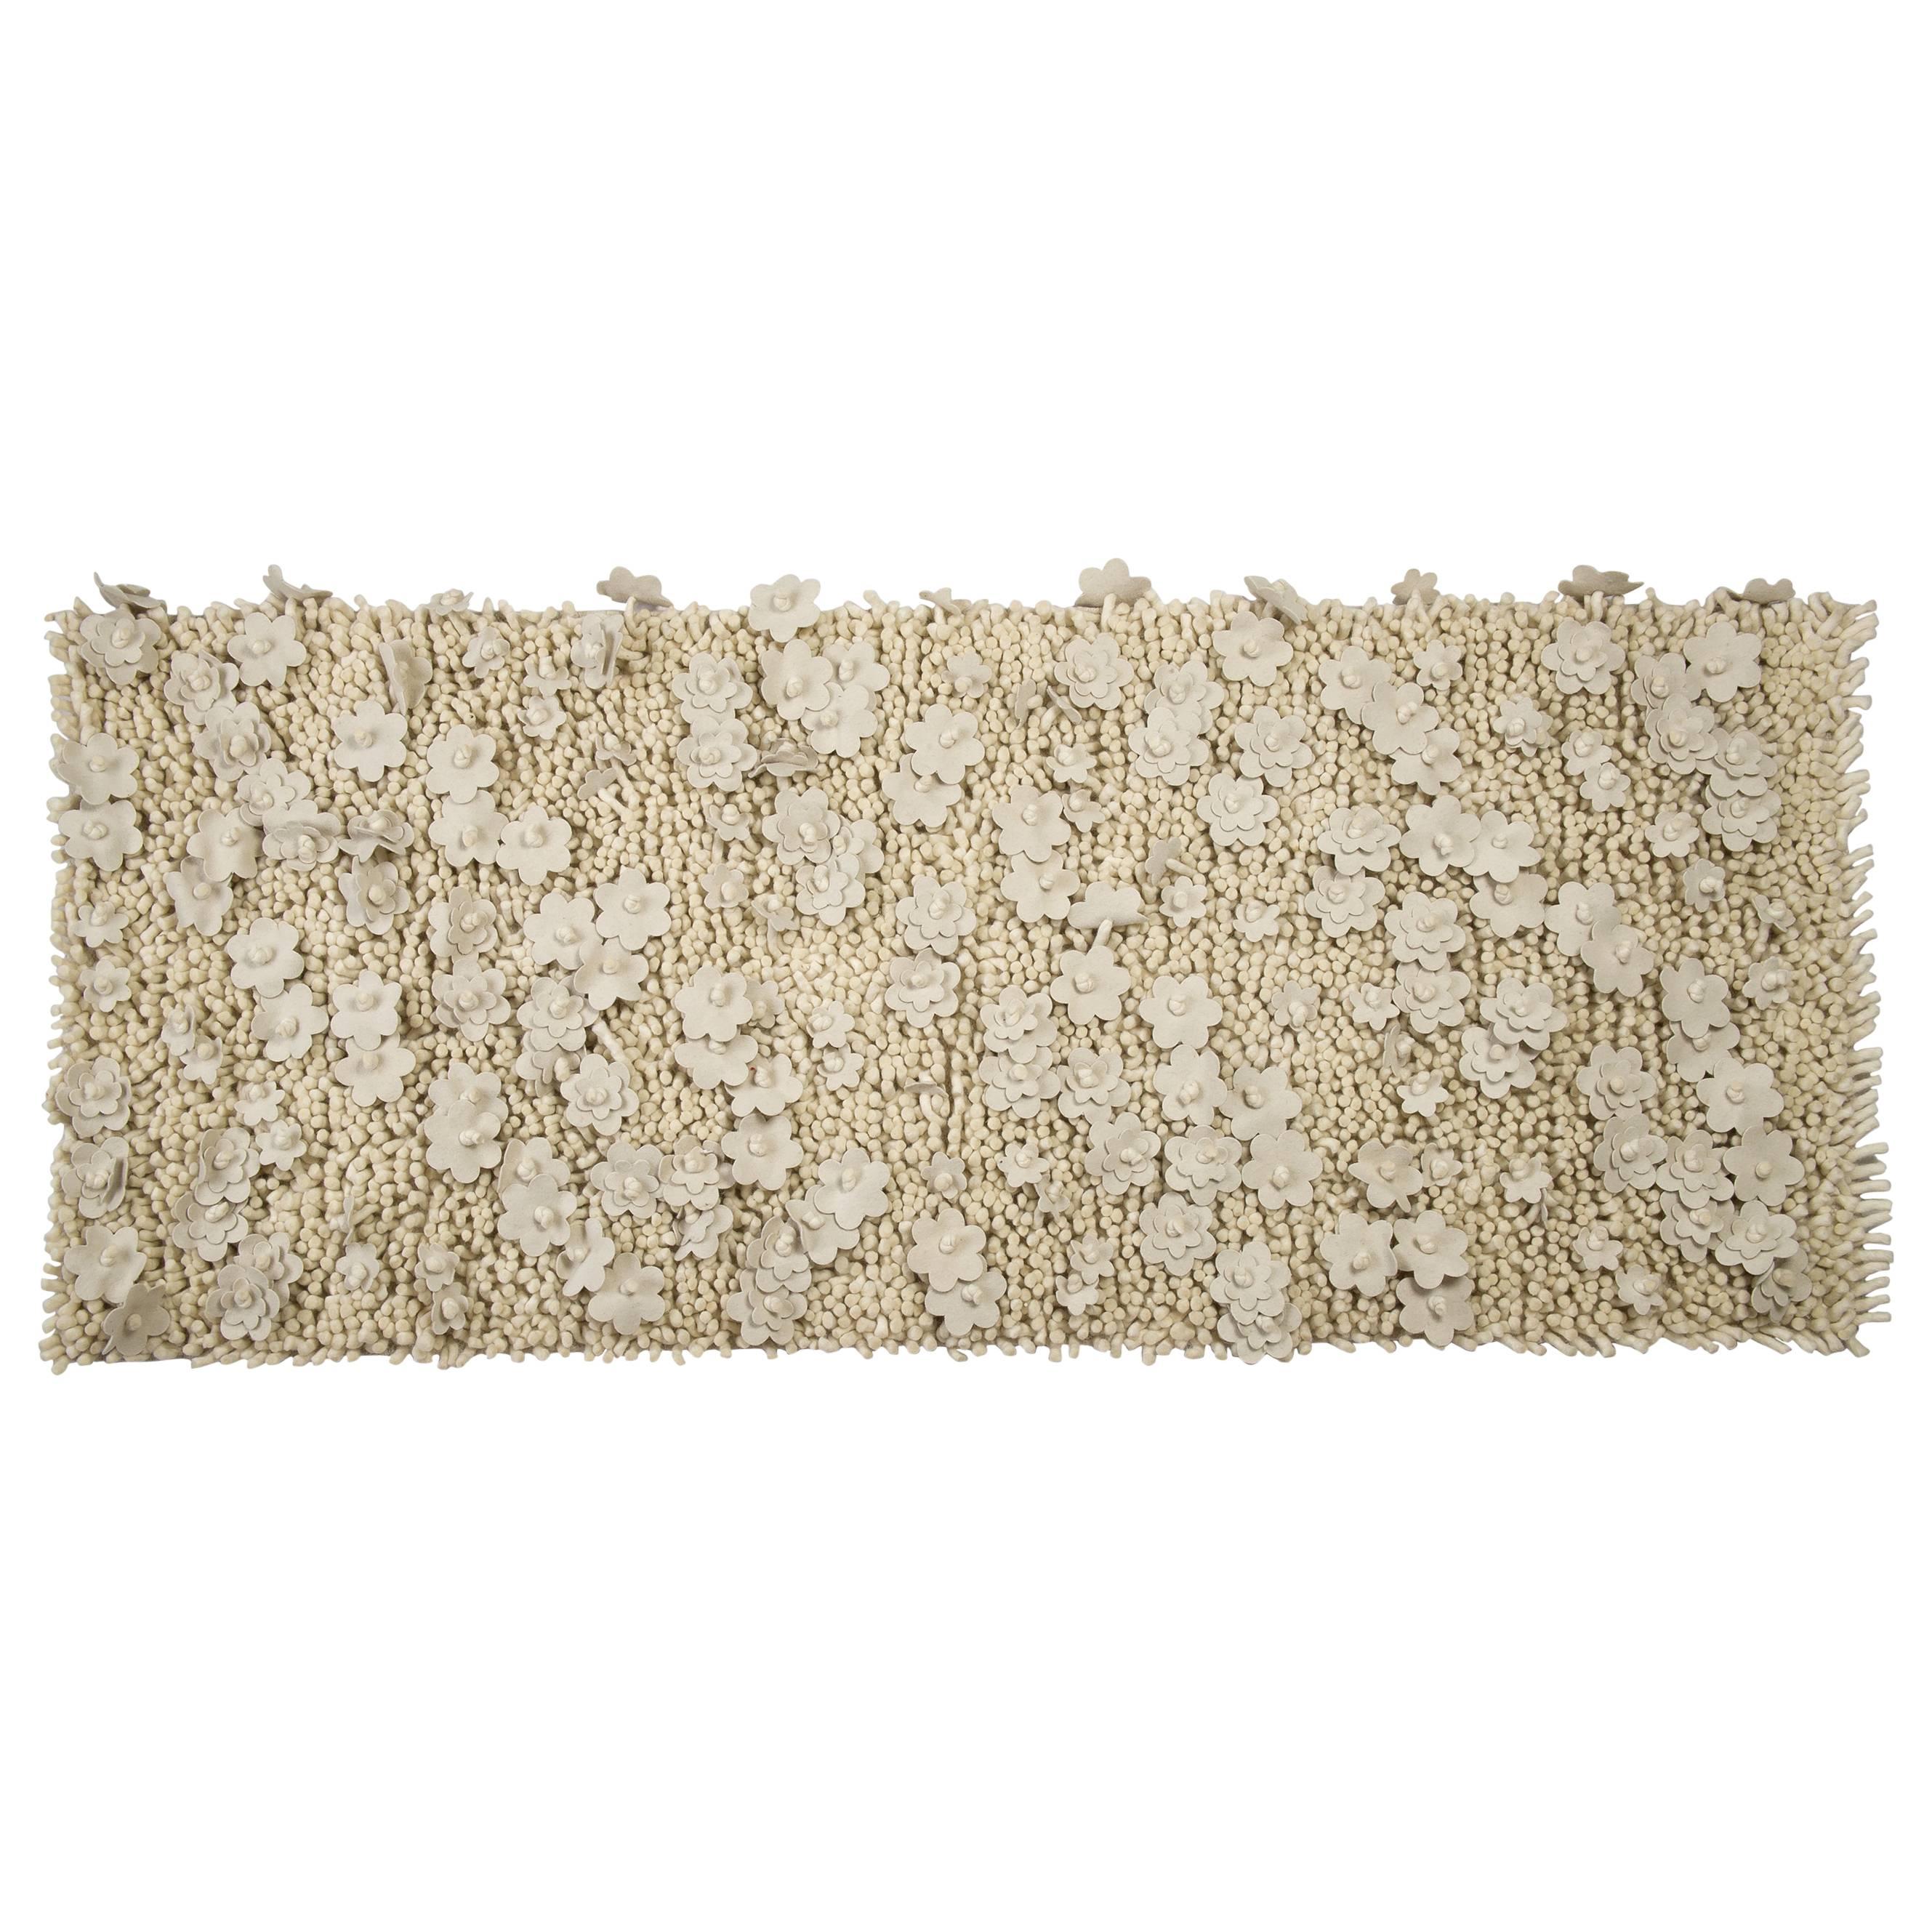  Unusual Wall Hanging or Bed Headboard with this Flower Rug